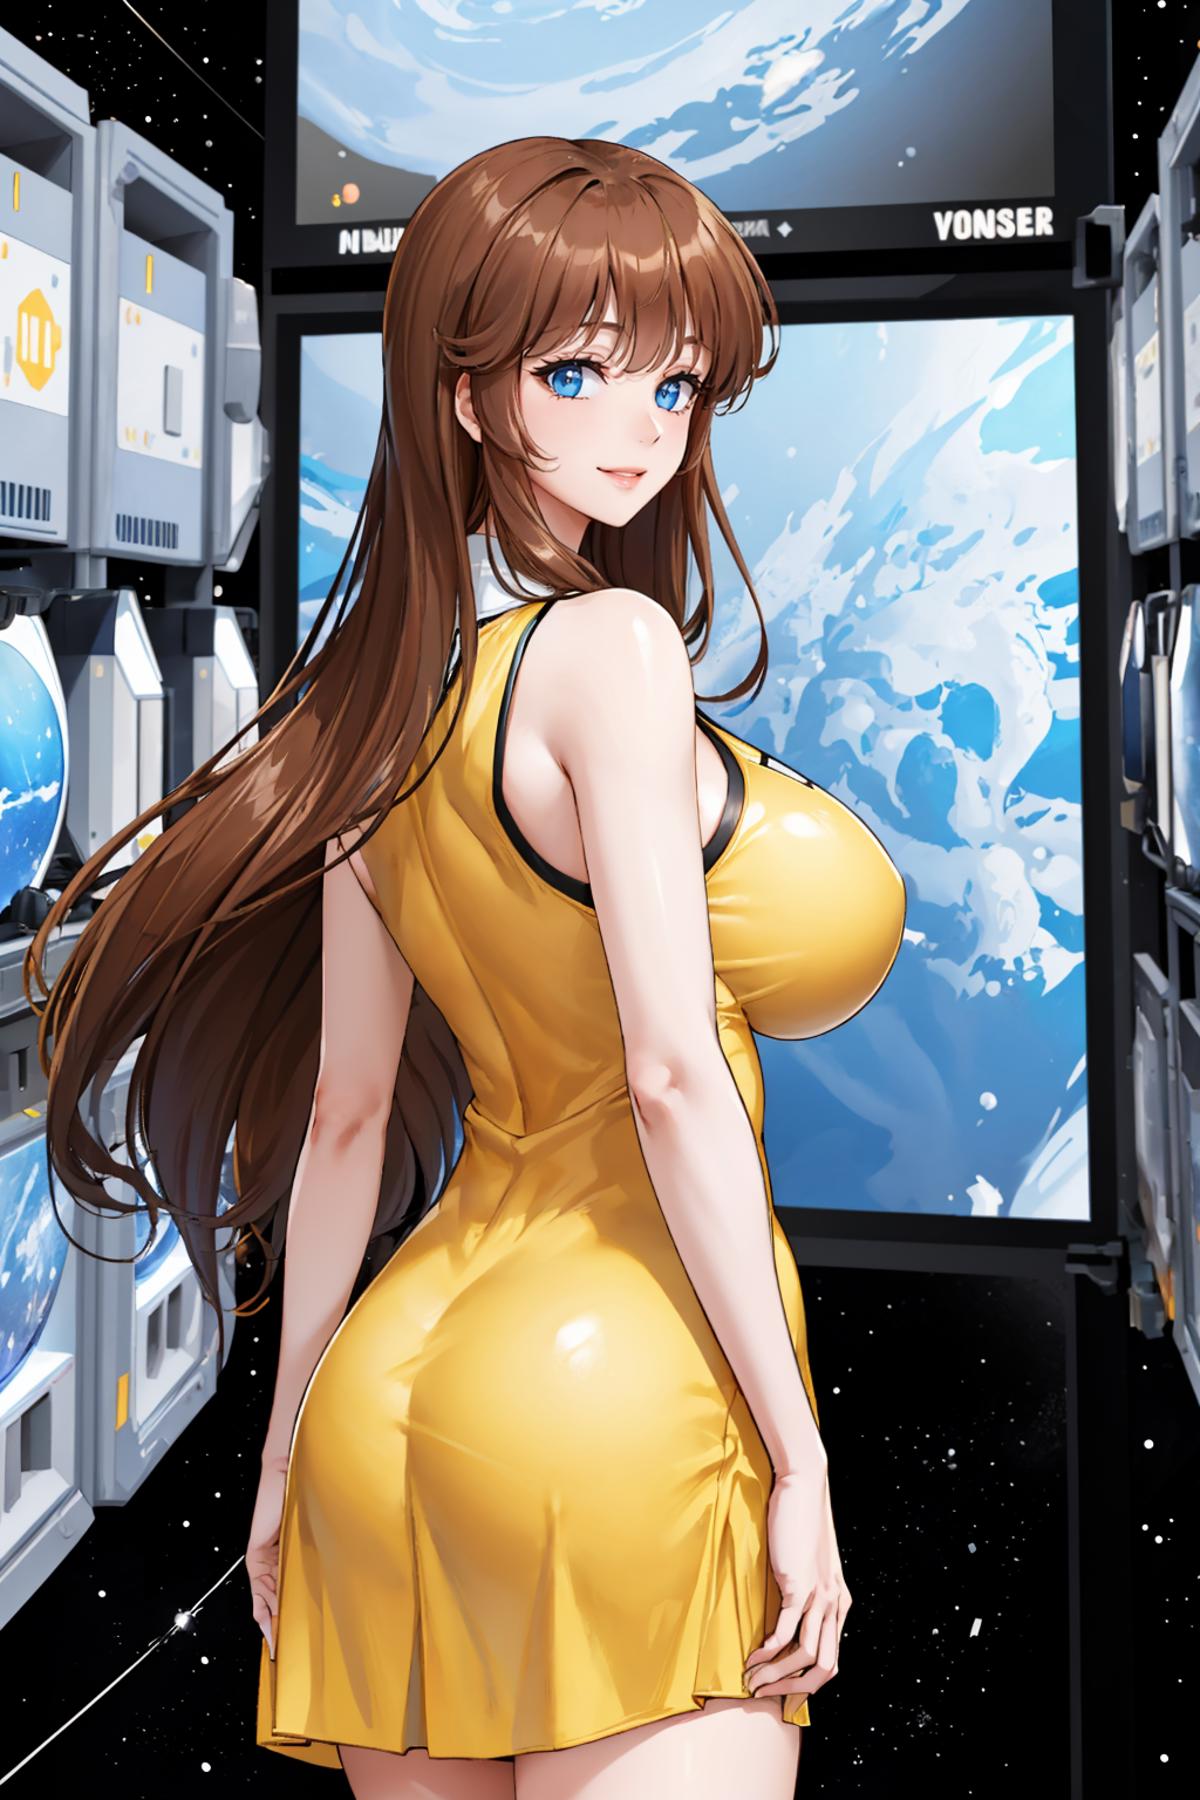 Anime character in a yellow dress with blue eyes and a large bust.